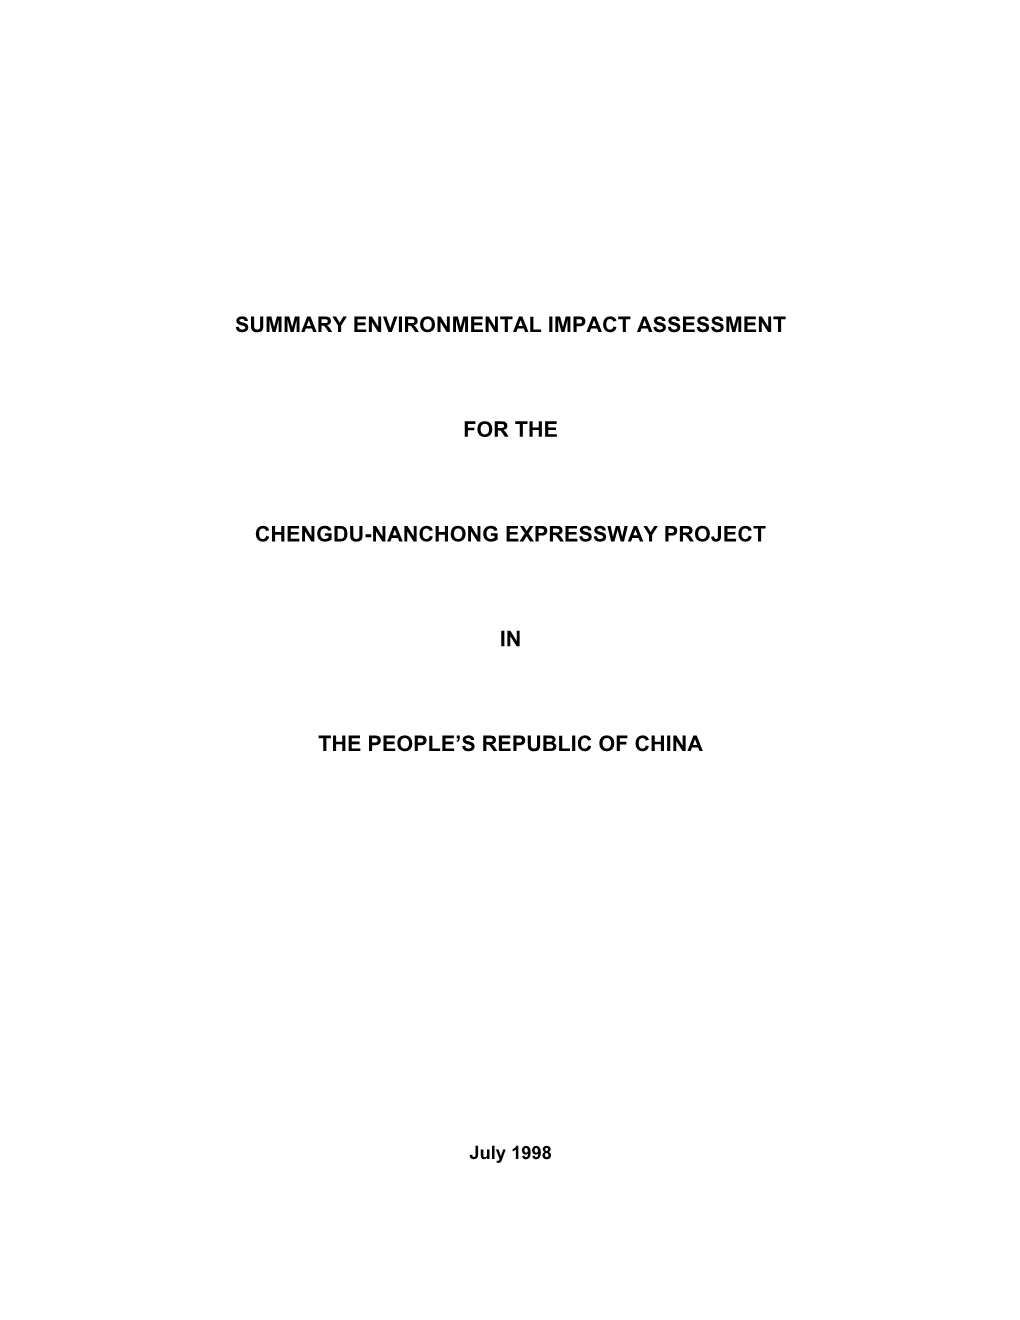 Summary Environmental Impact Assessment for the Chengdu-Nanchong Expressway Project in the People's Republic of China